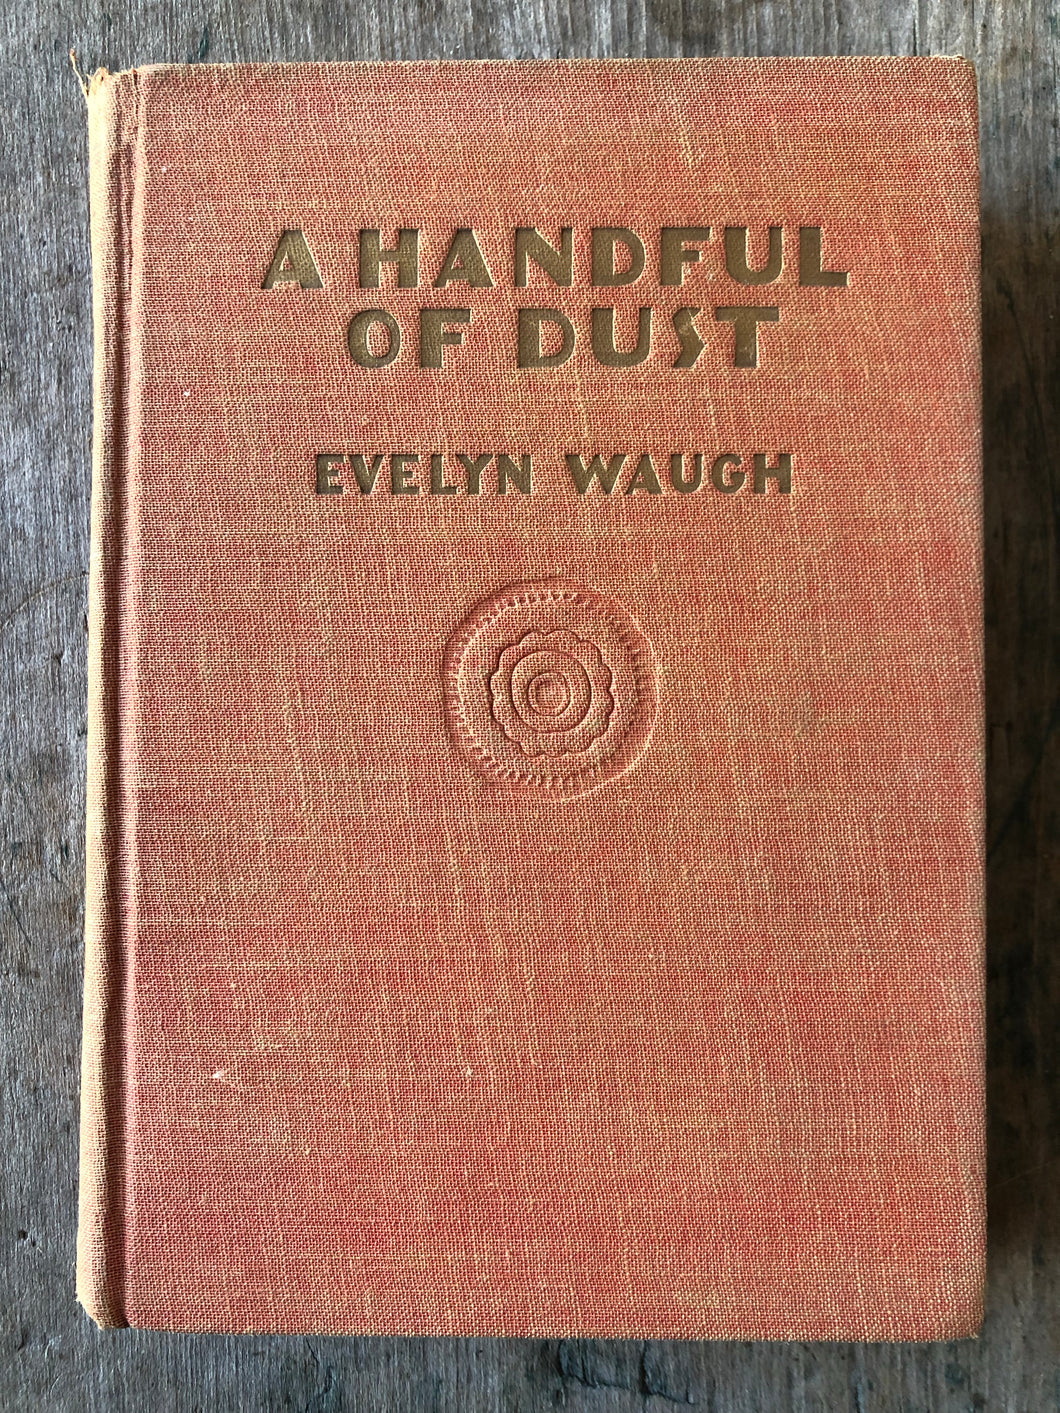 A Handfull of Dust. by Evelyn Waugh